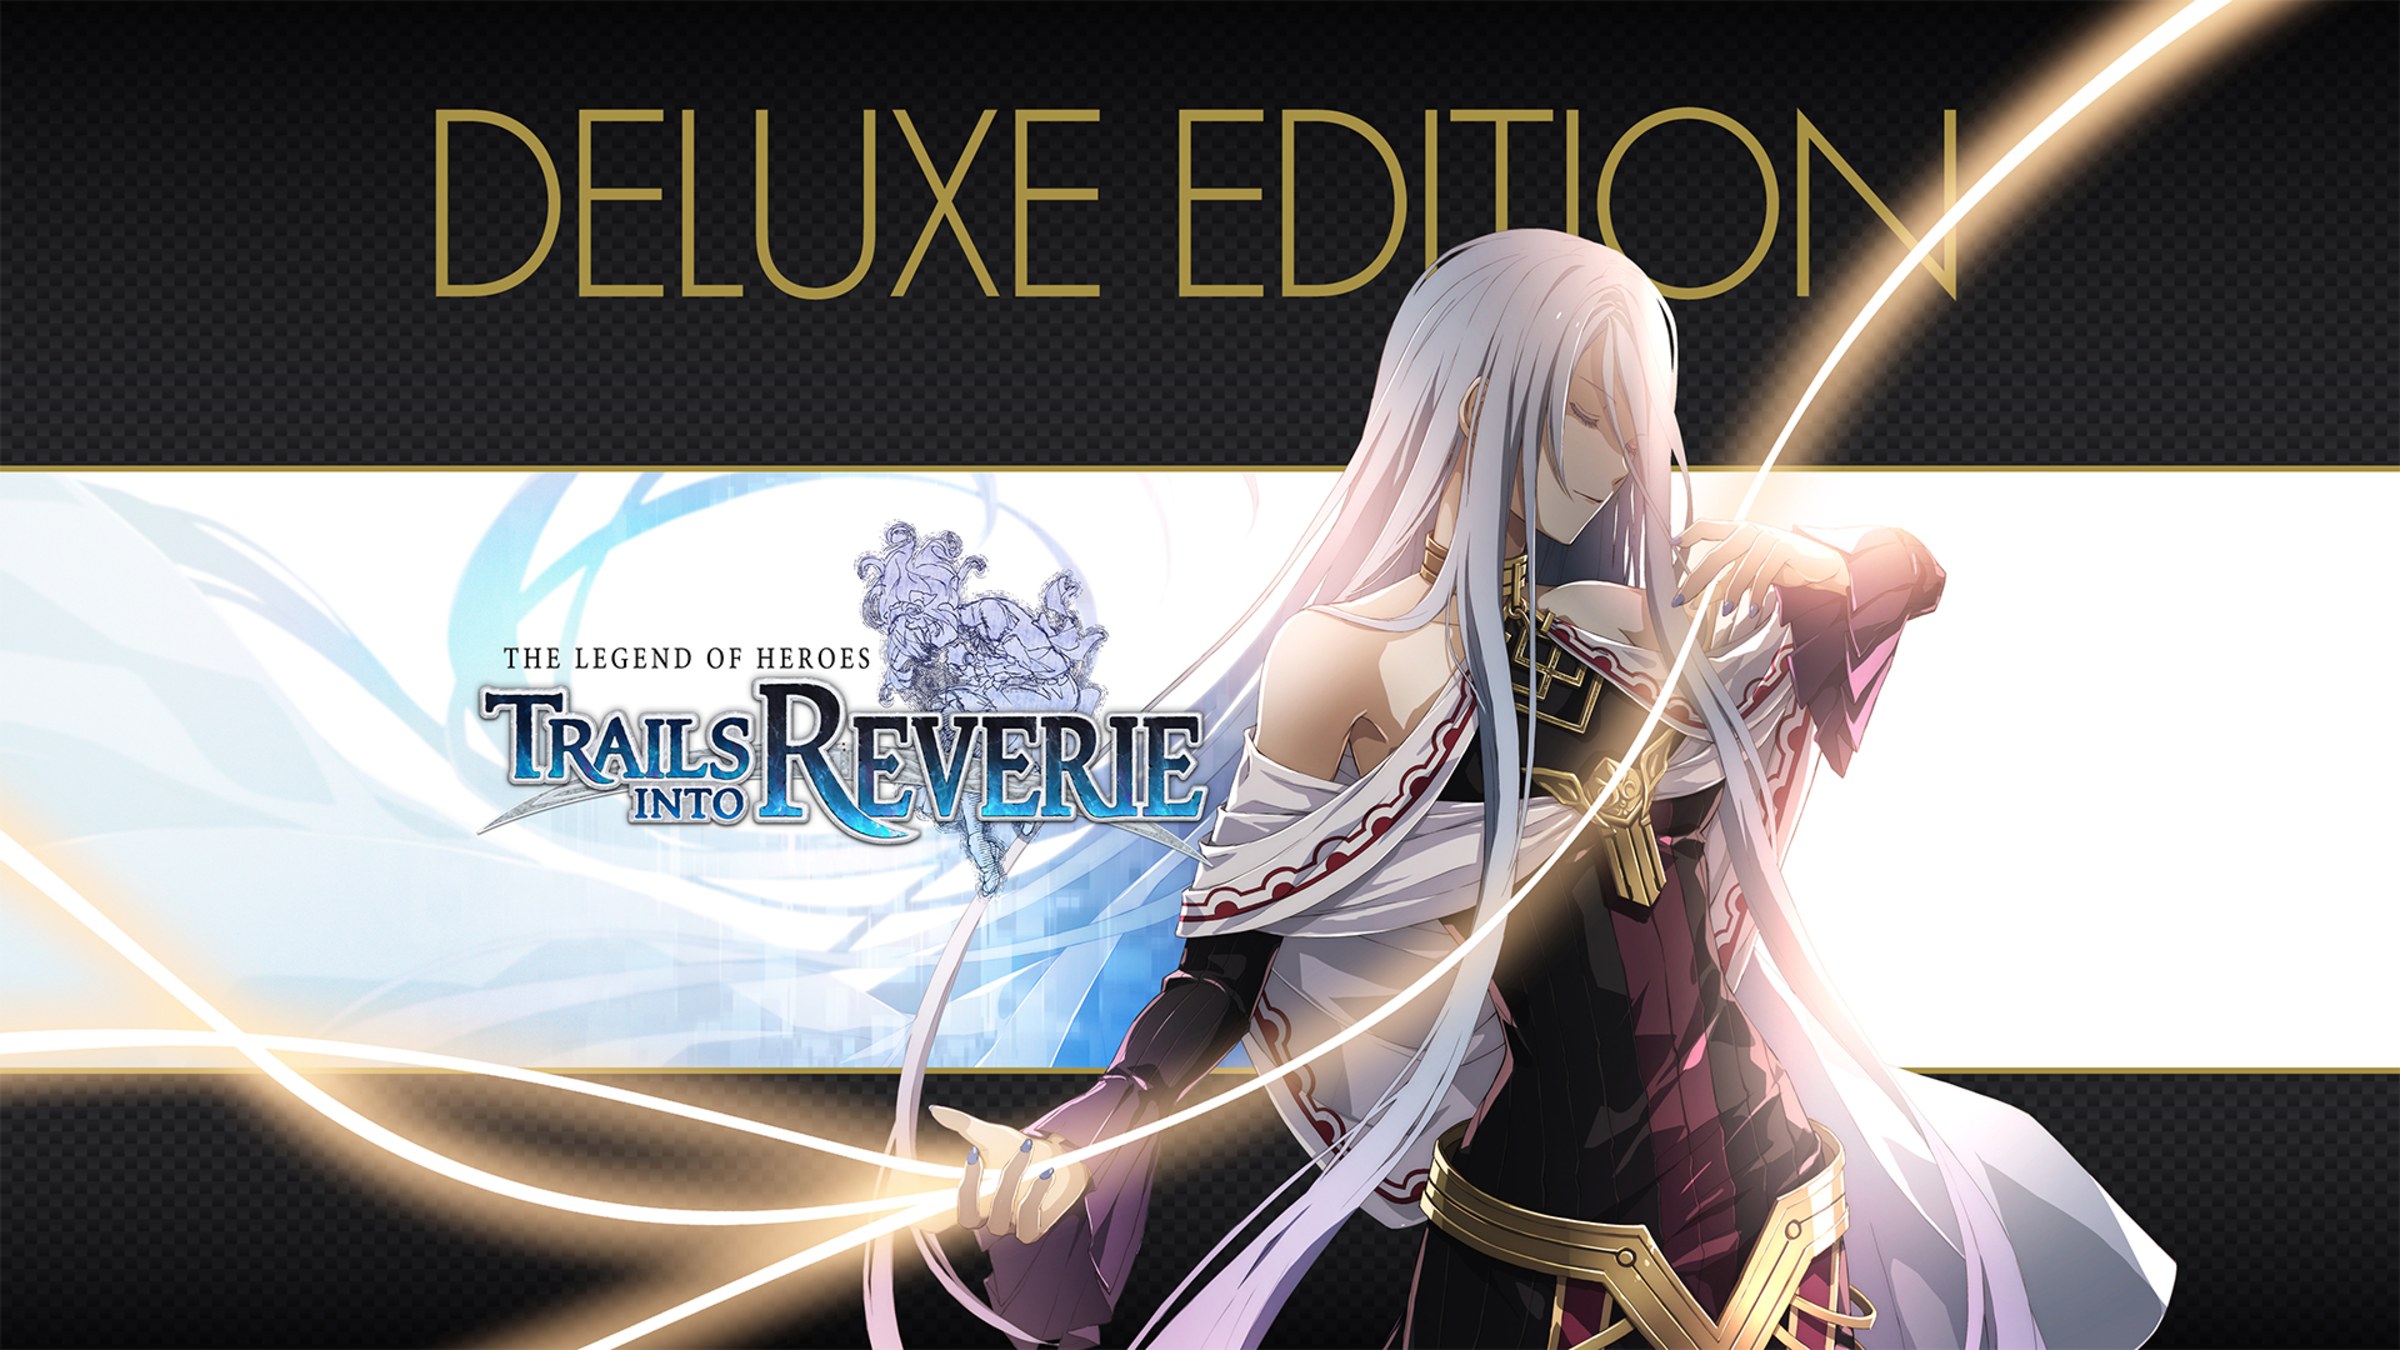 the-legend-of-heroes-trails-into-reverie-deluxe-edition-para-nintendo-switch-sitio-oficial-de